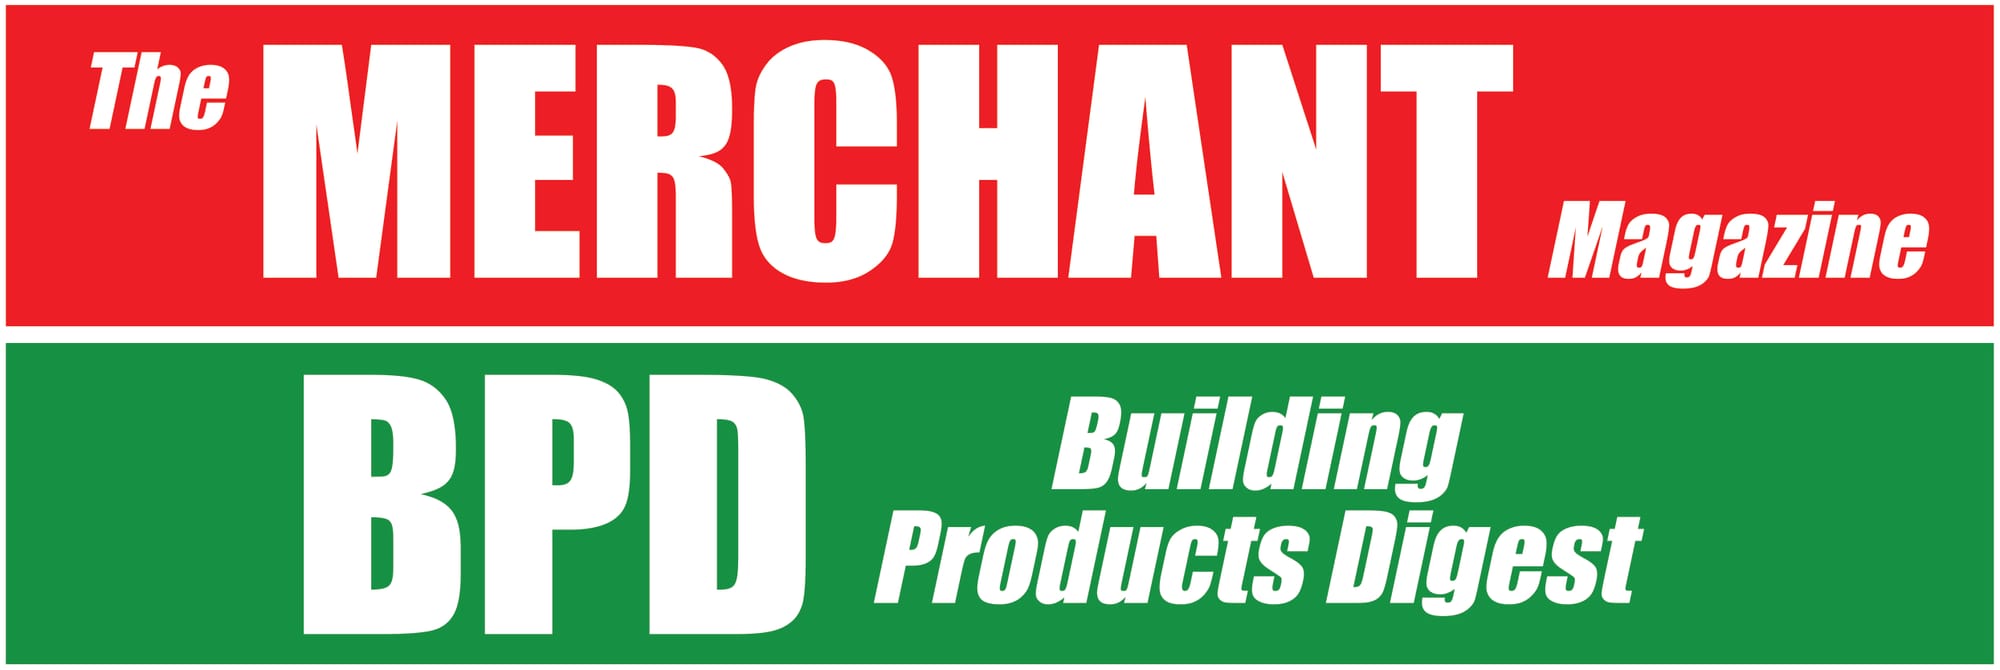 Building Products Digest | The Merchant Magazine - A 526 Media Group Publication